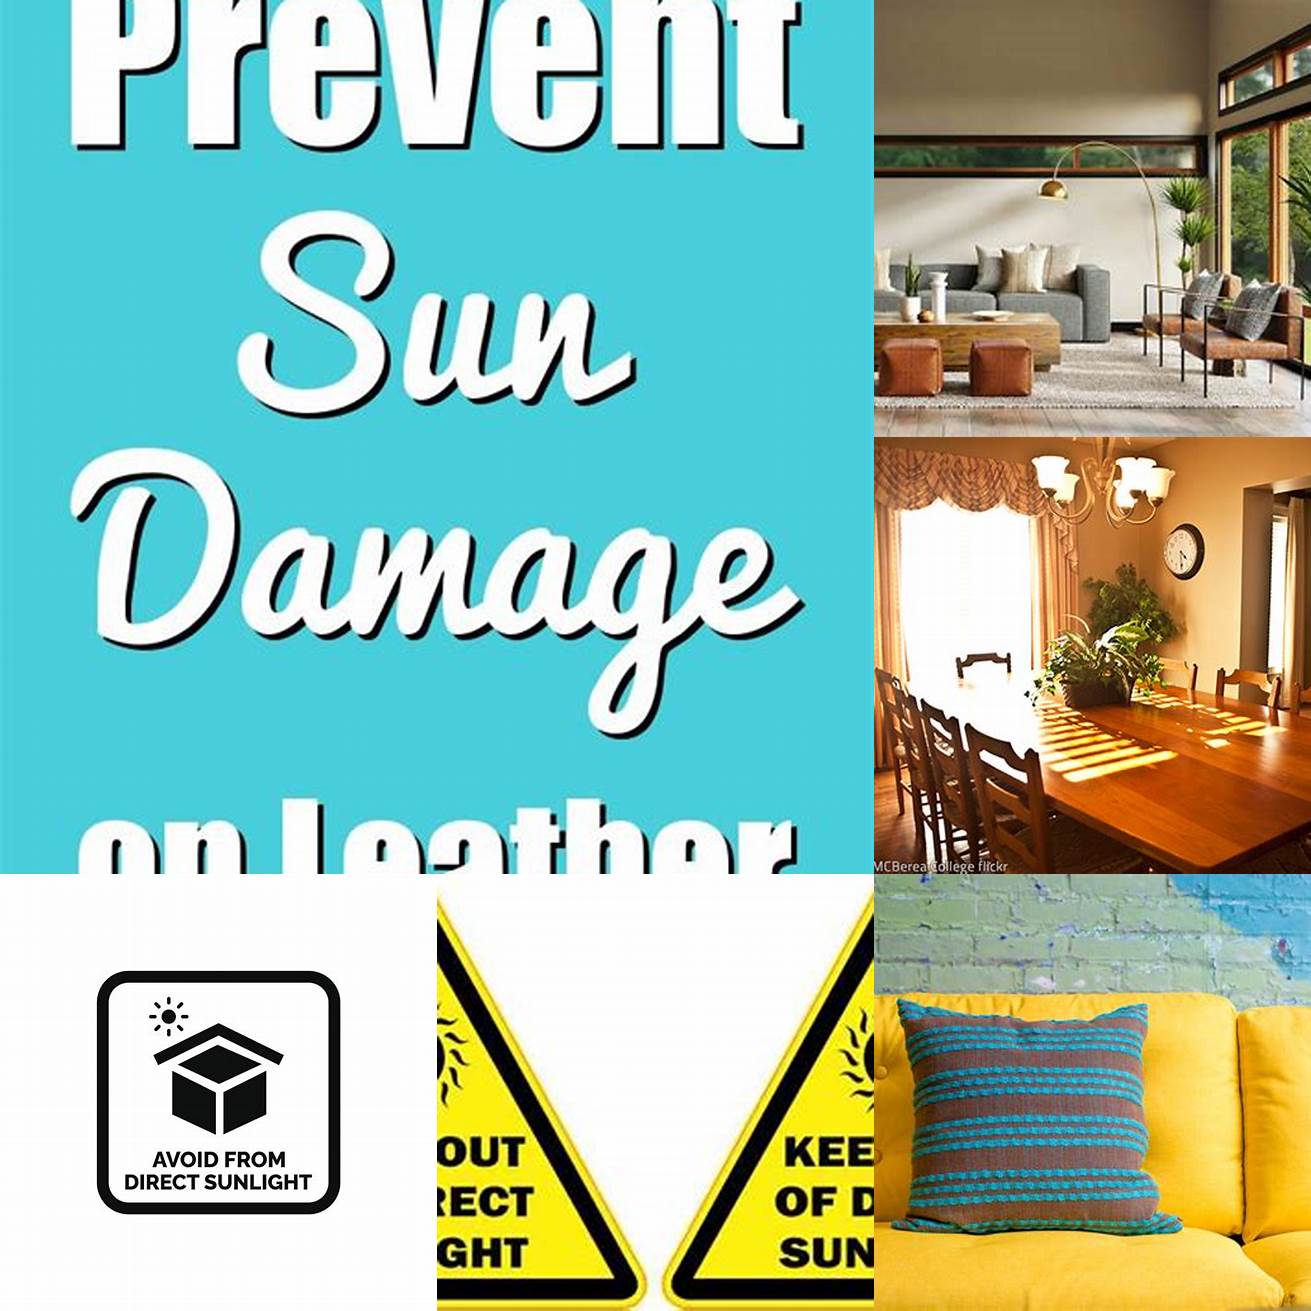 Avoid leaving the furniture in direct sunlight